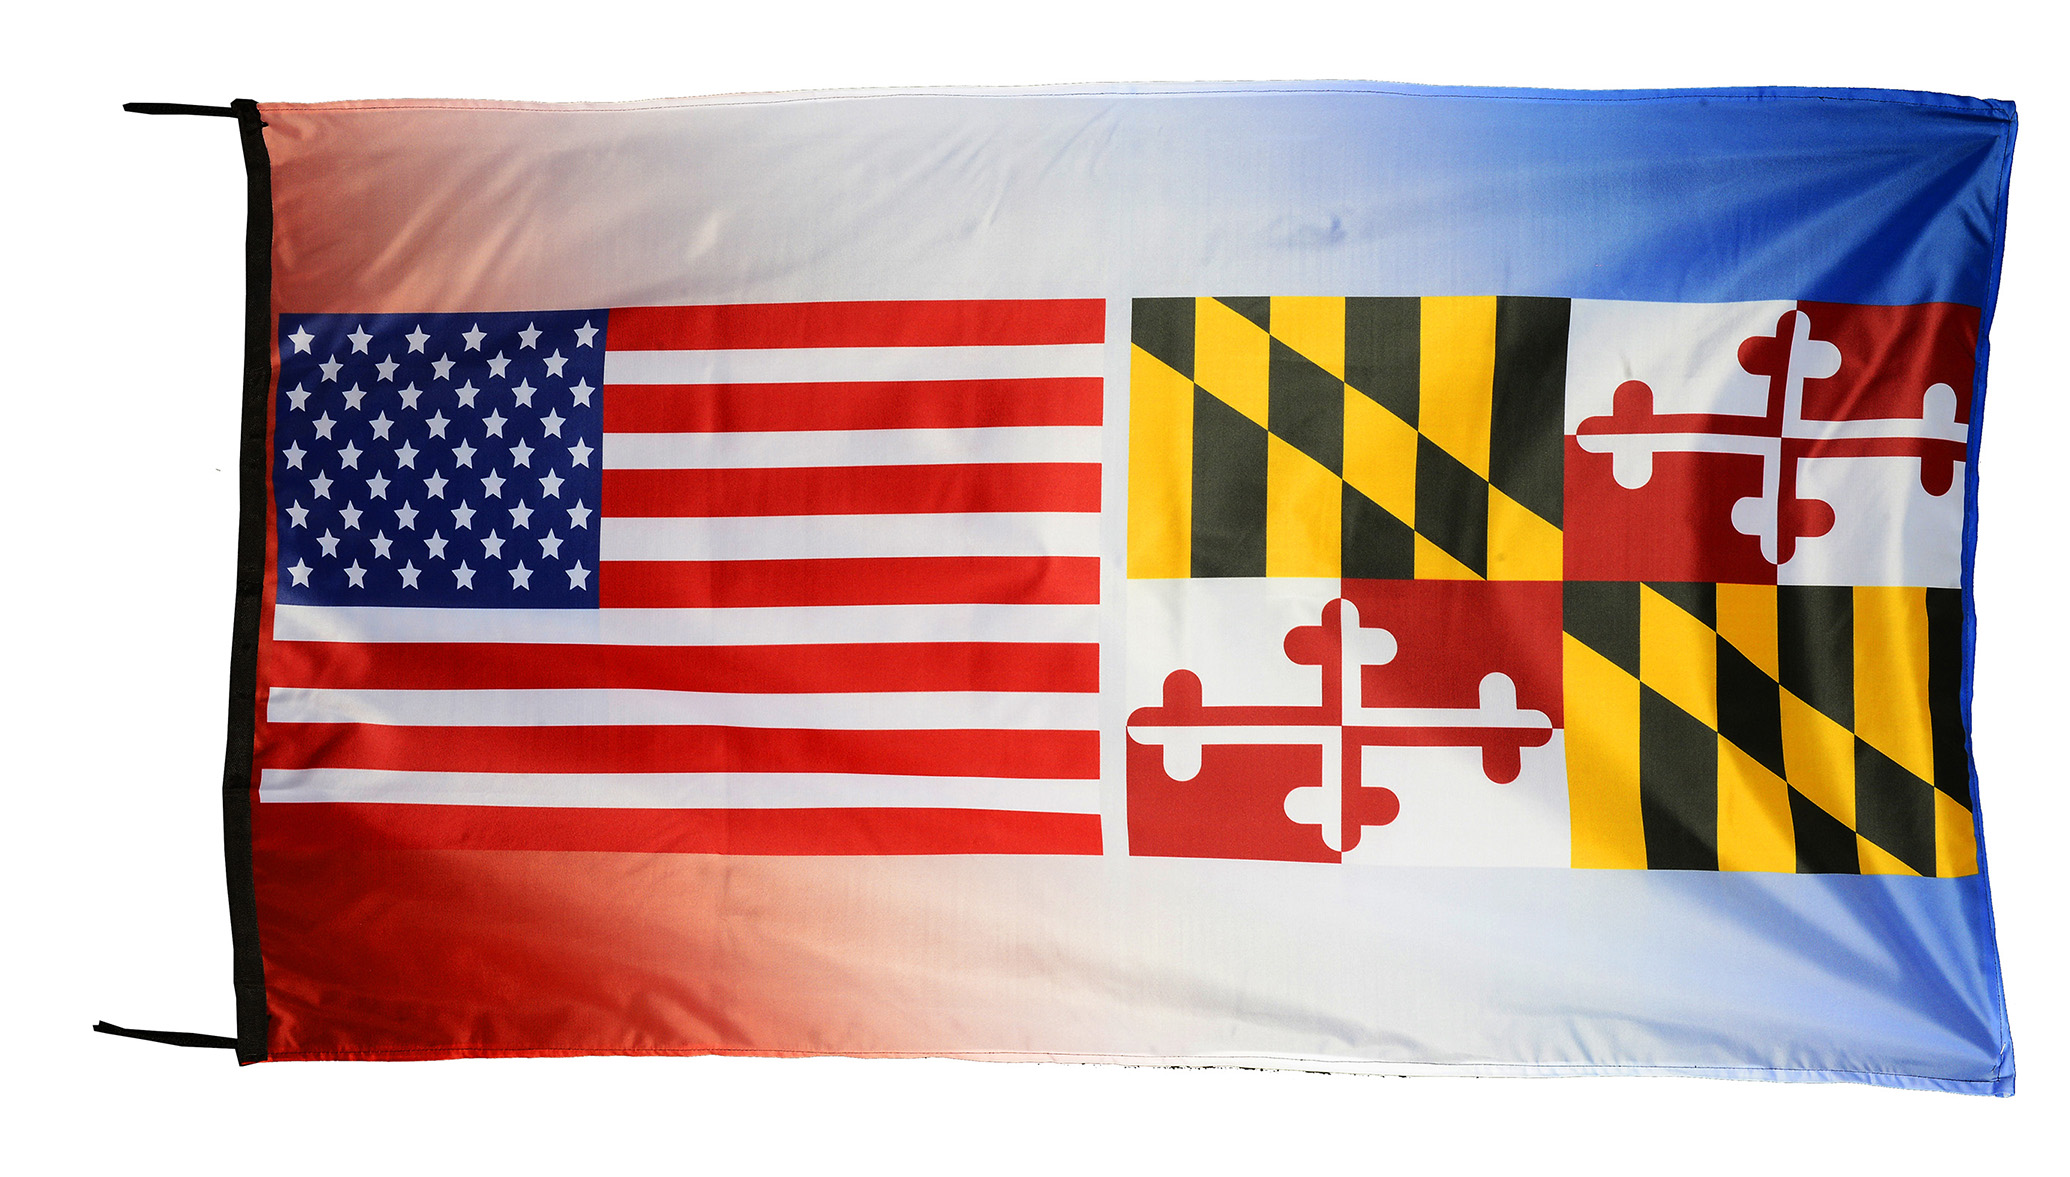 Flag  095 USA / US Country / United States Of America and Maryland State / Patriotic / Pride Hybrid Weather-Resistant Polyester Outdoor Flag Landscape Banner / Vivid Colors / 3 X 5 FT (150 x 90cm) International Flags for Sale